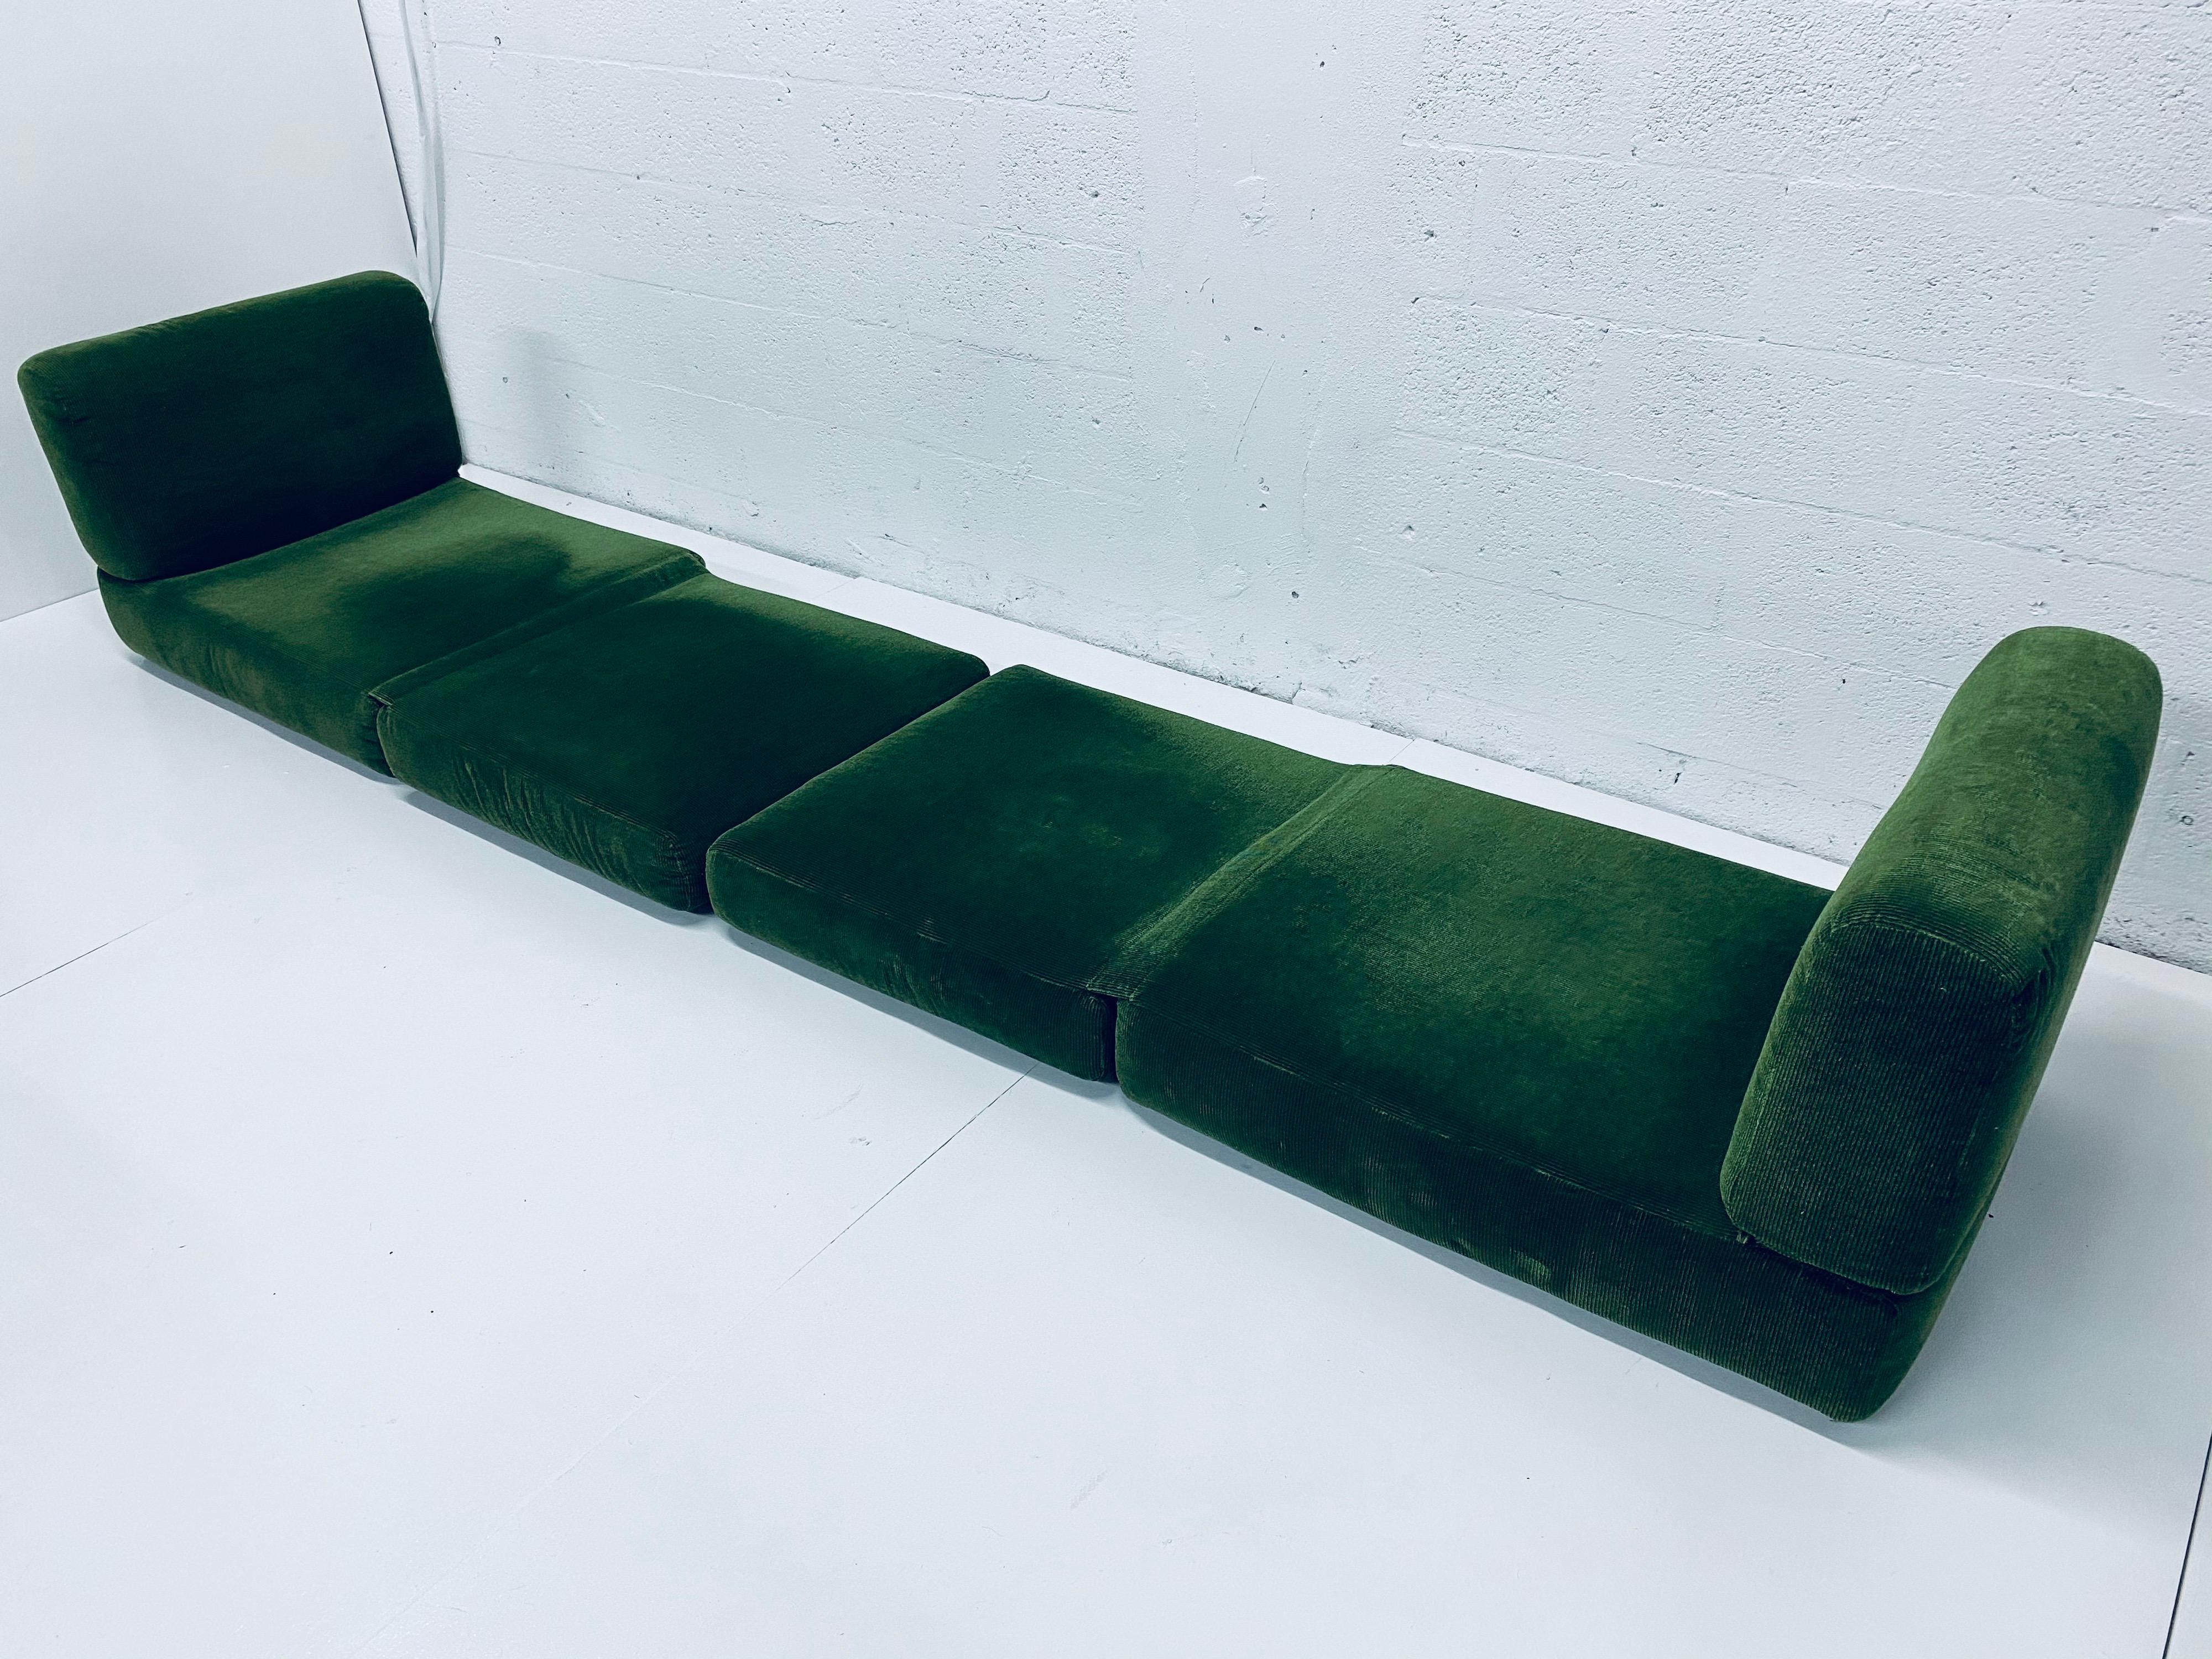 Pair of Midcentury Green Corduroy Upholstered Convertible Lounge Chair Daybeds 1